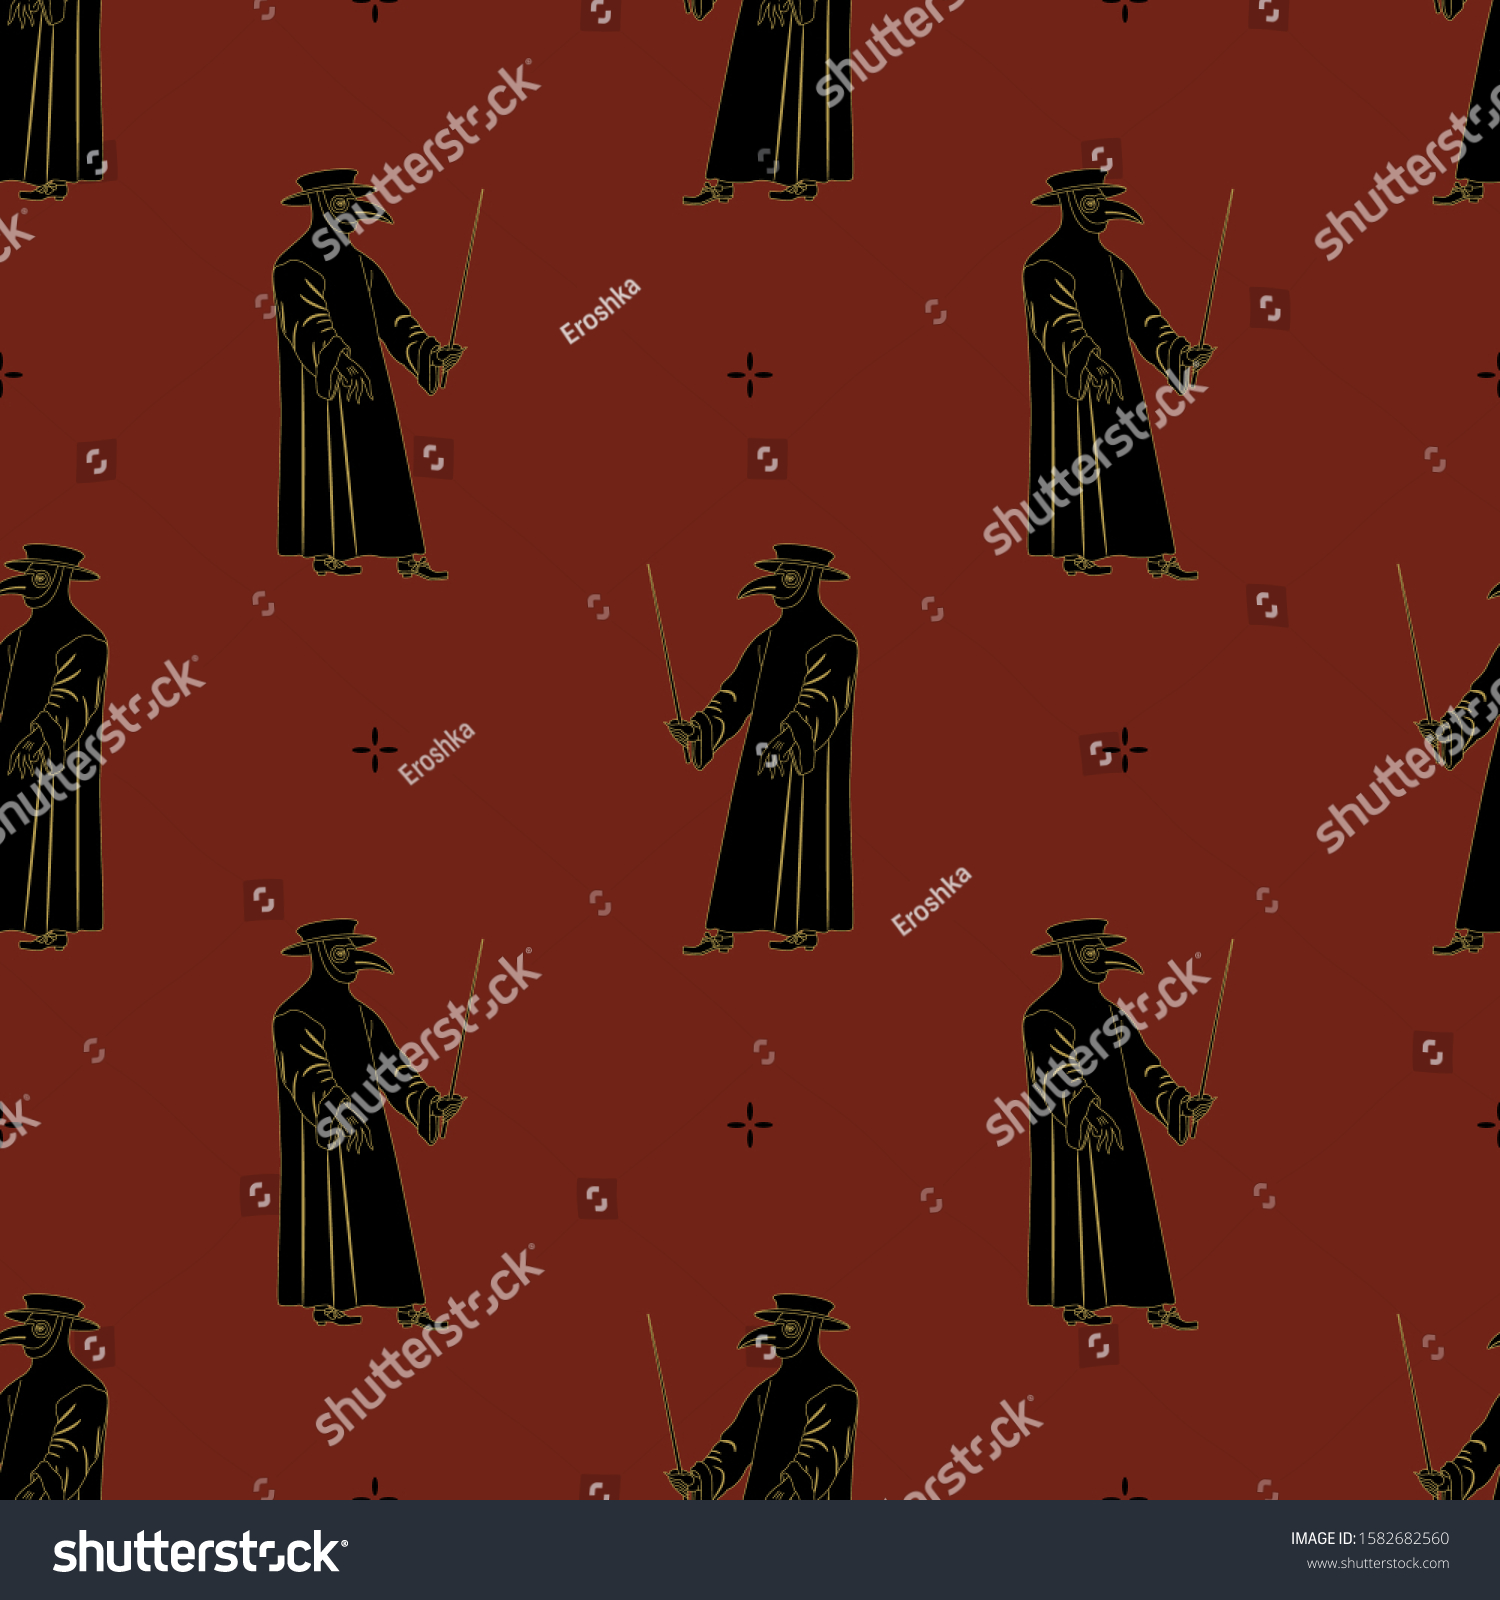 SVG of Seamless geometrical pattern with silhouettes of vintage plague doctor. Medieval spooky character with long raven's beak. svg